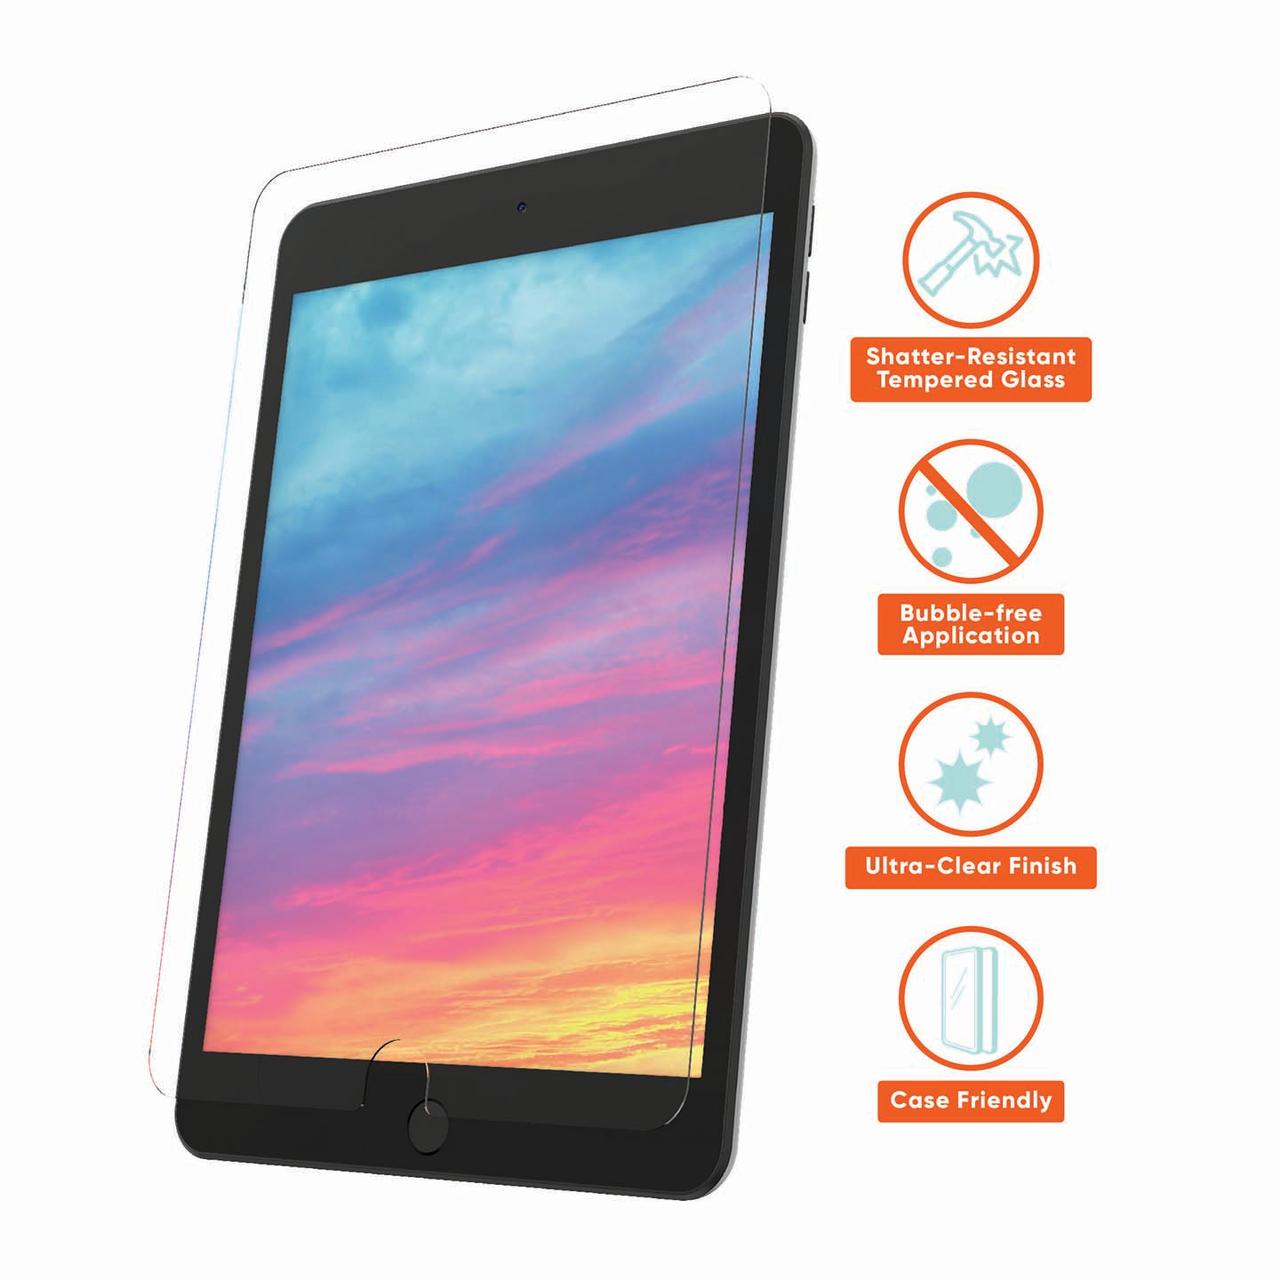 onn. Glass Screen Protector for iPad Mini (Generations 1/2/3/4/5) - image 2 of 5